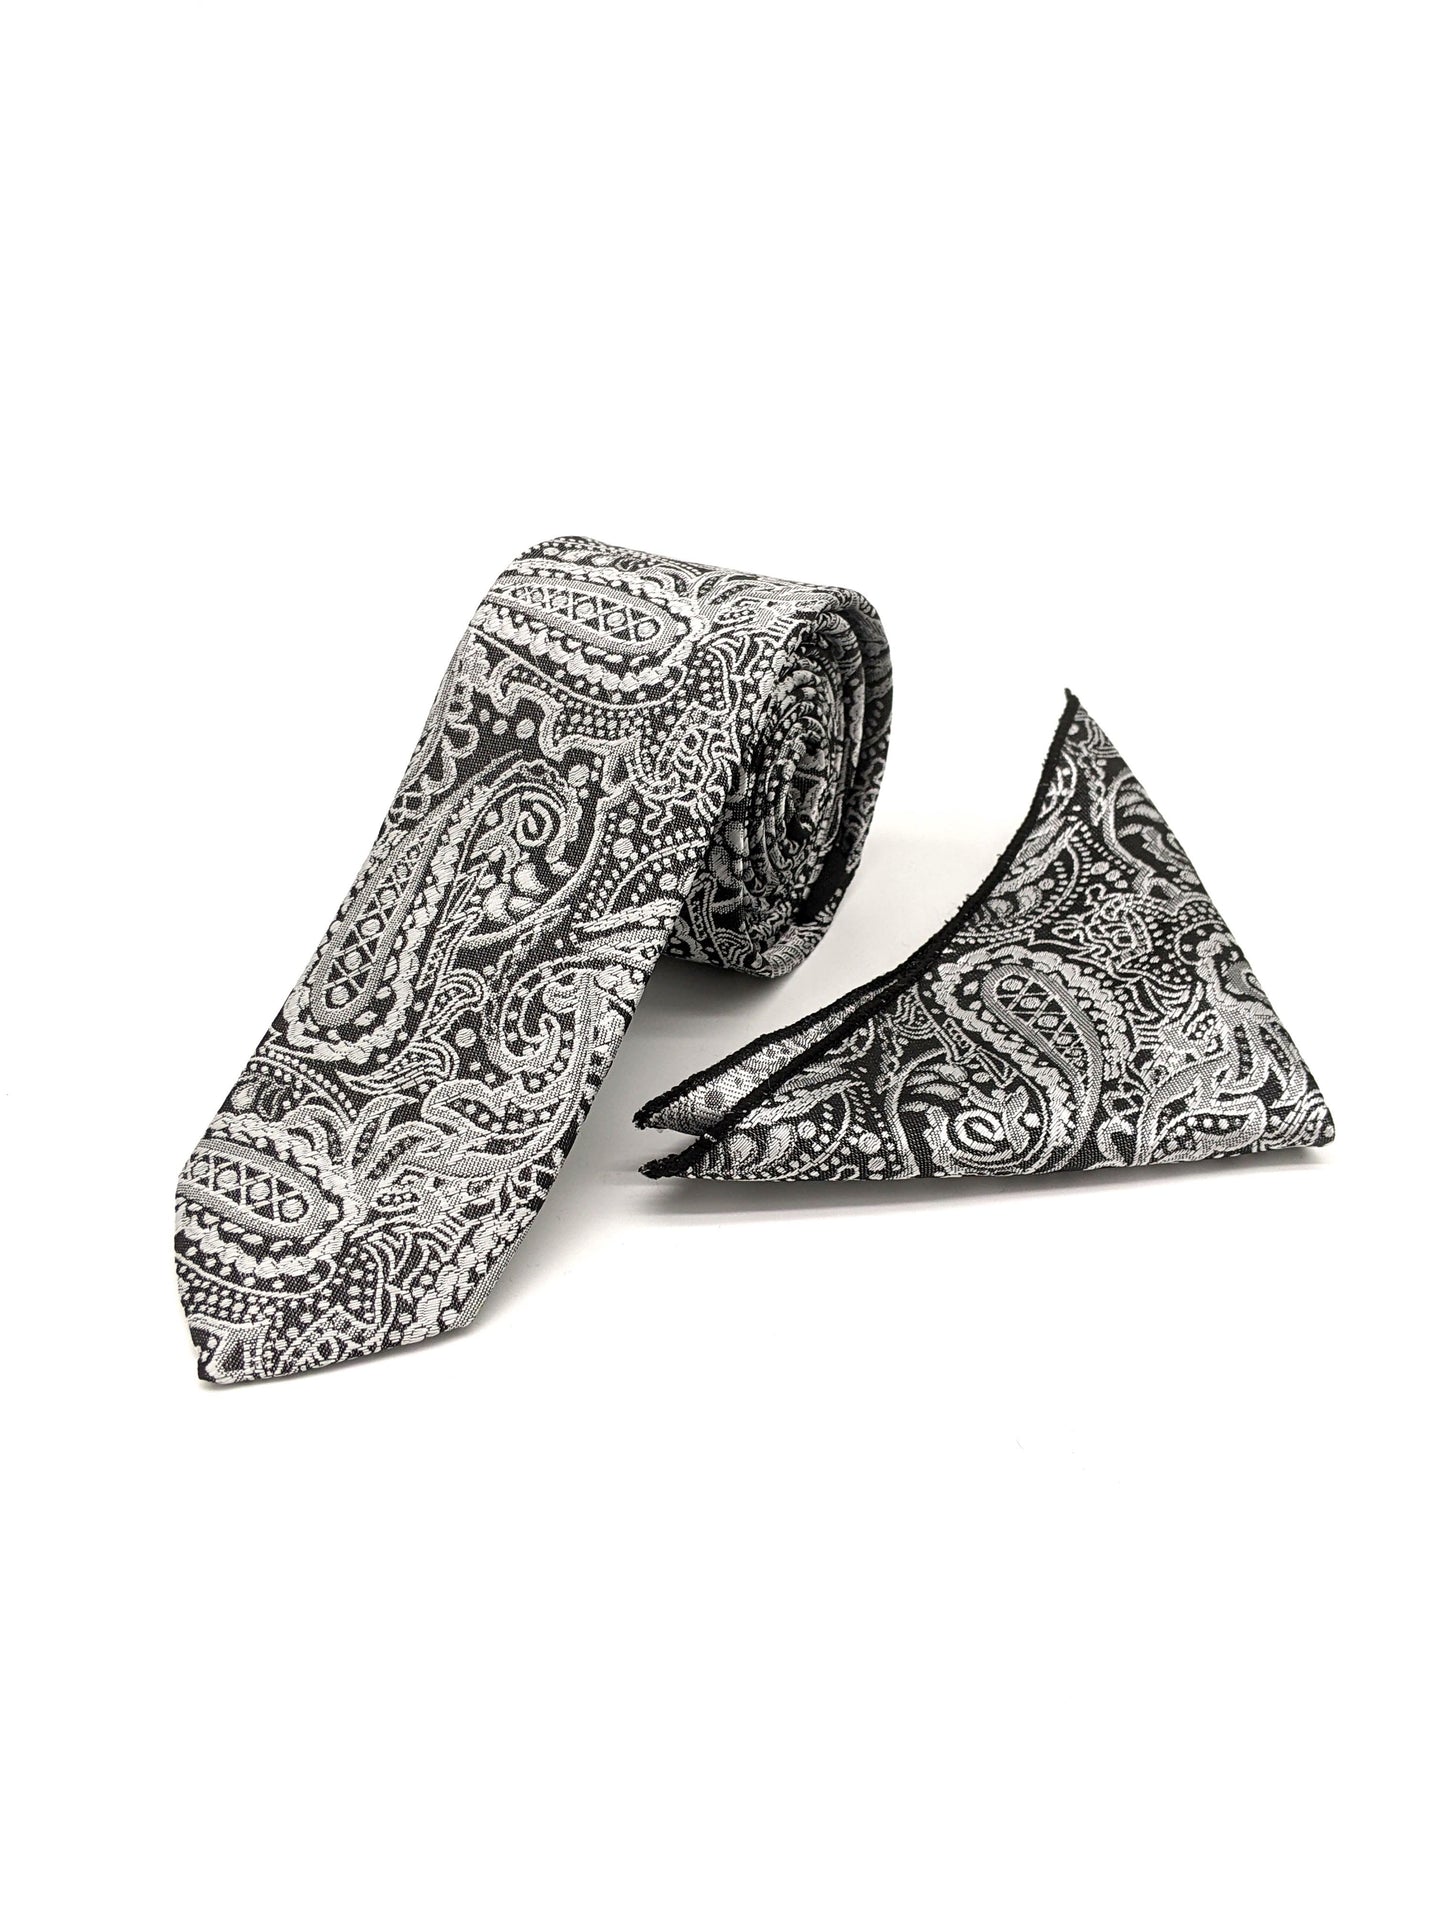 Satin Tie and Pocket Square ~ in Grey Paisley